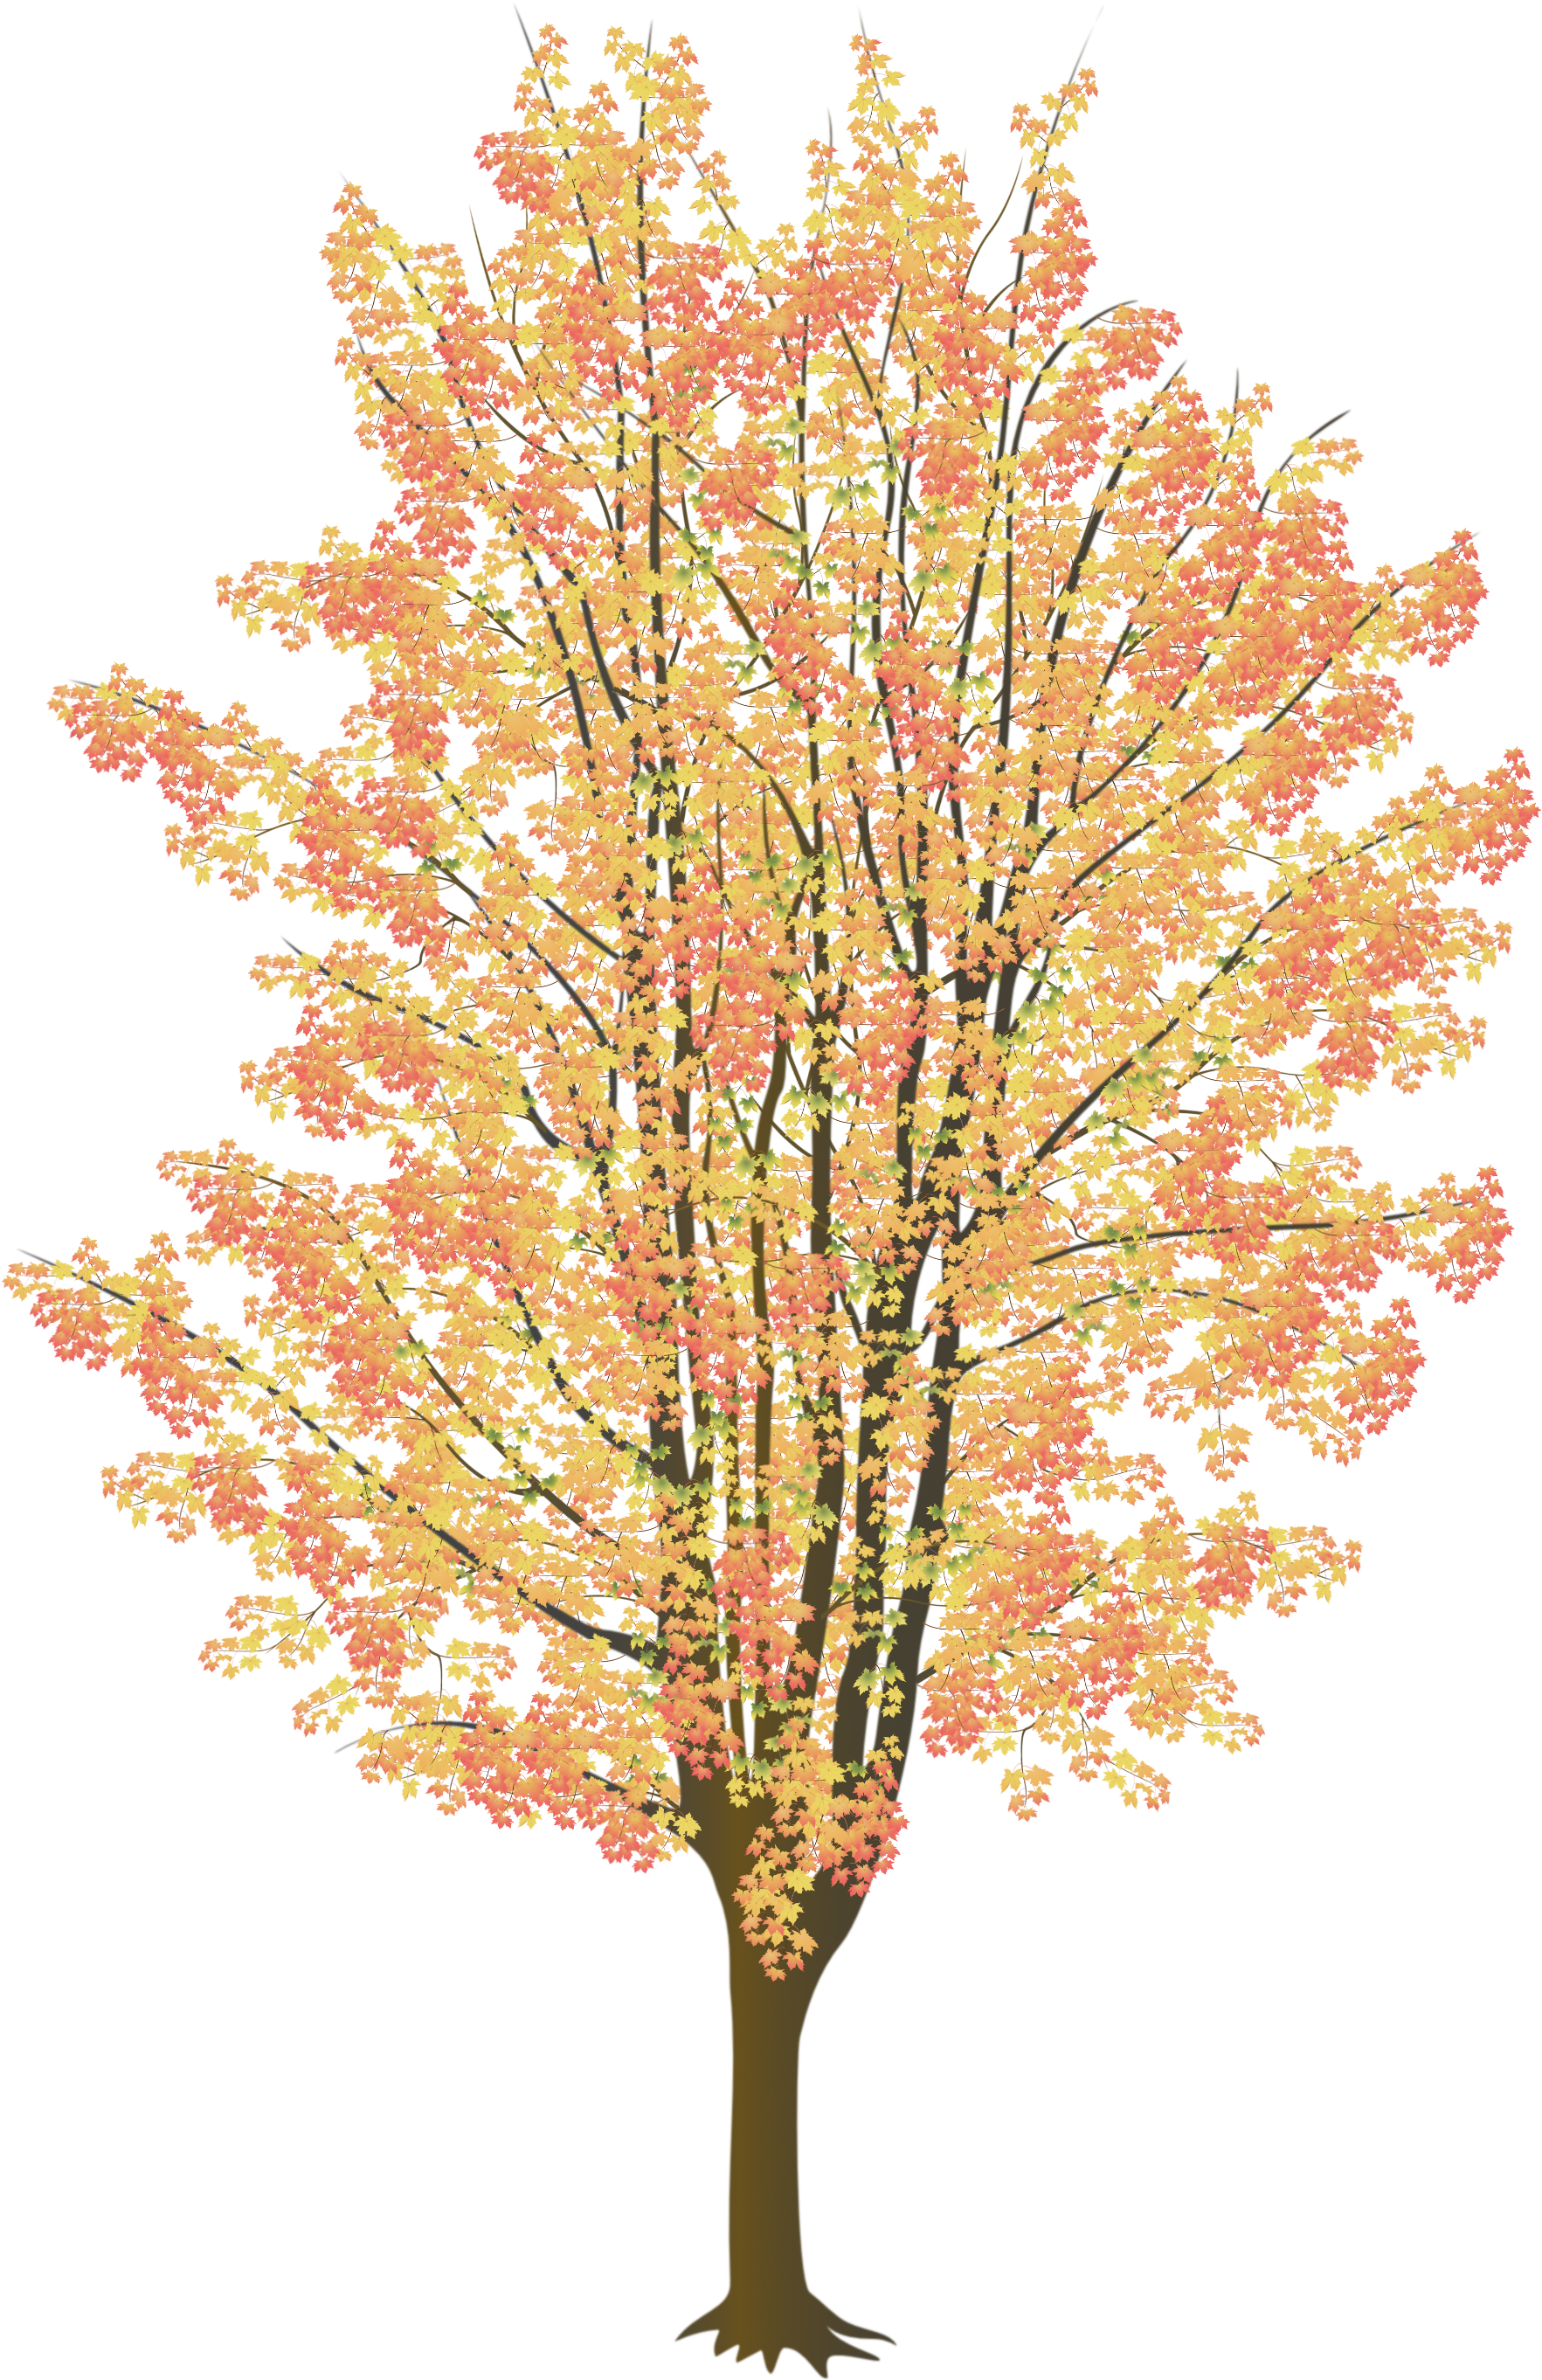 Maple Tree No Leaves Download - River Birch (1846x2812)